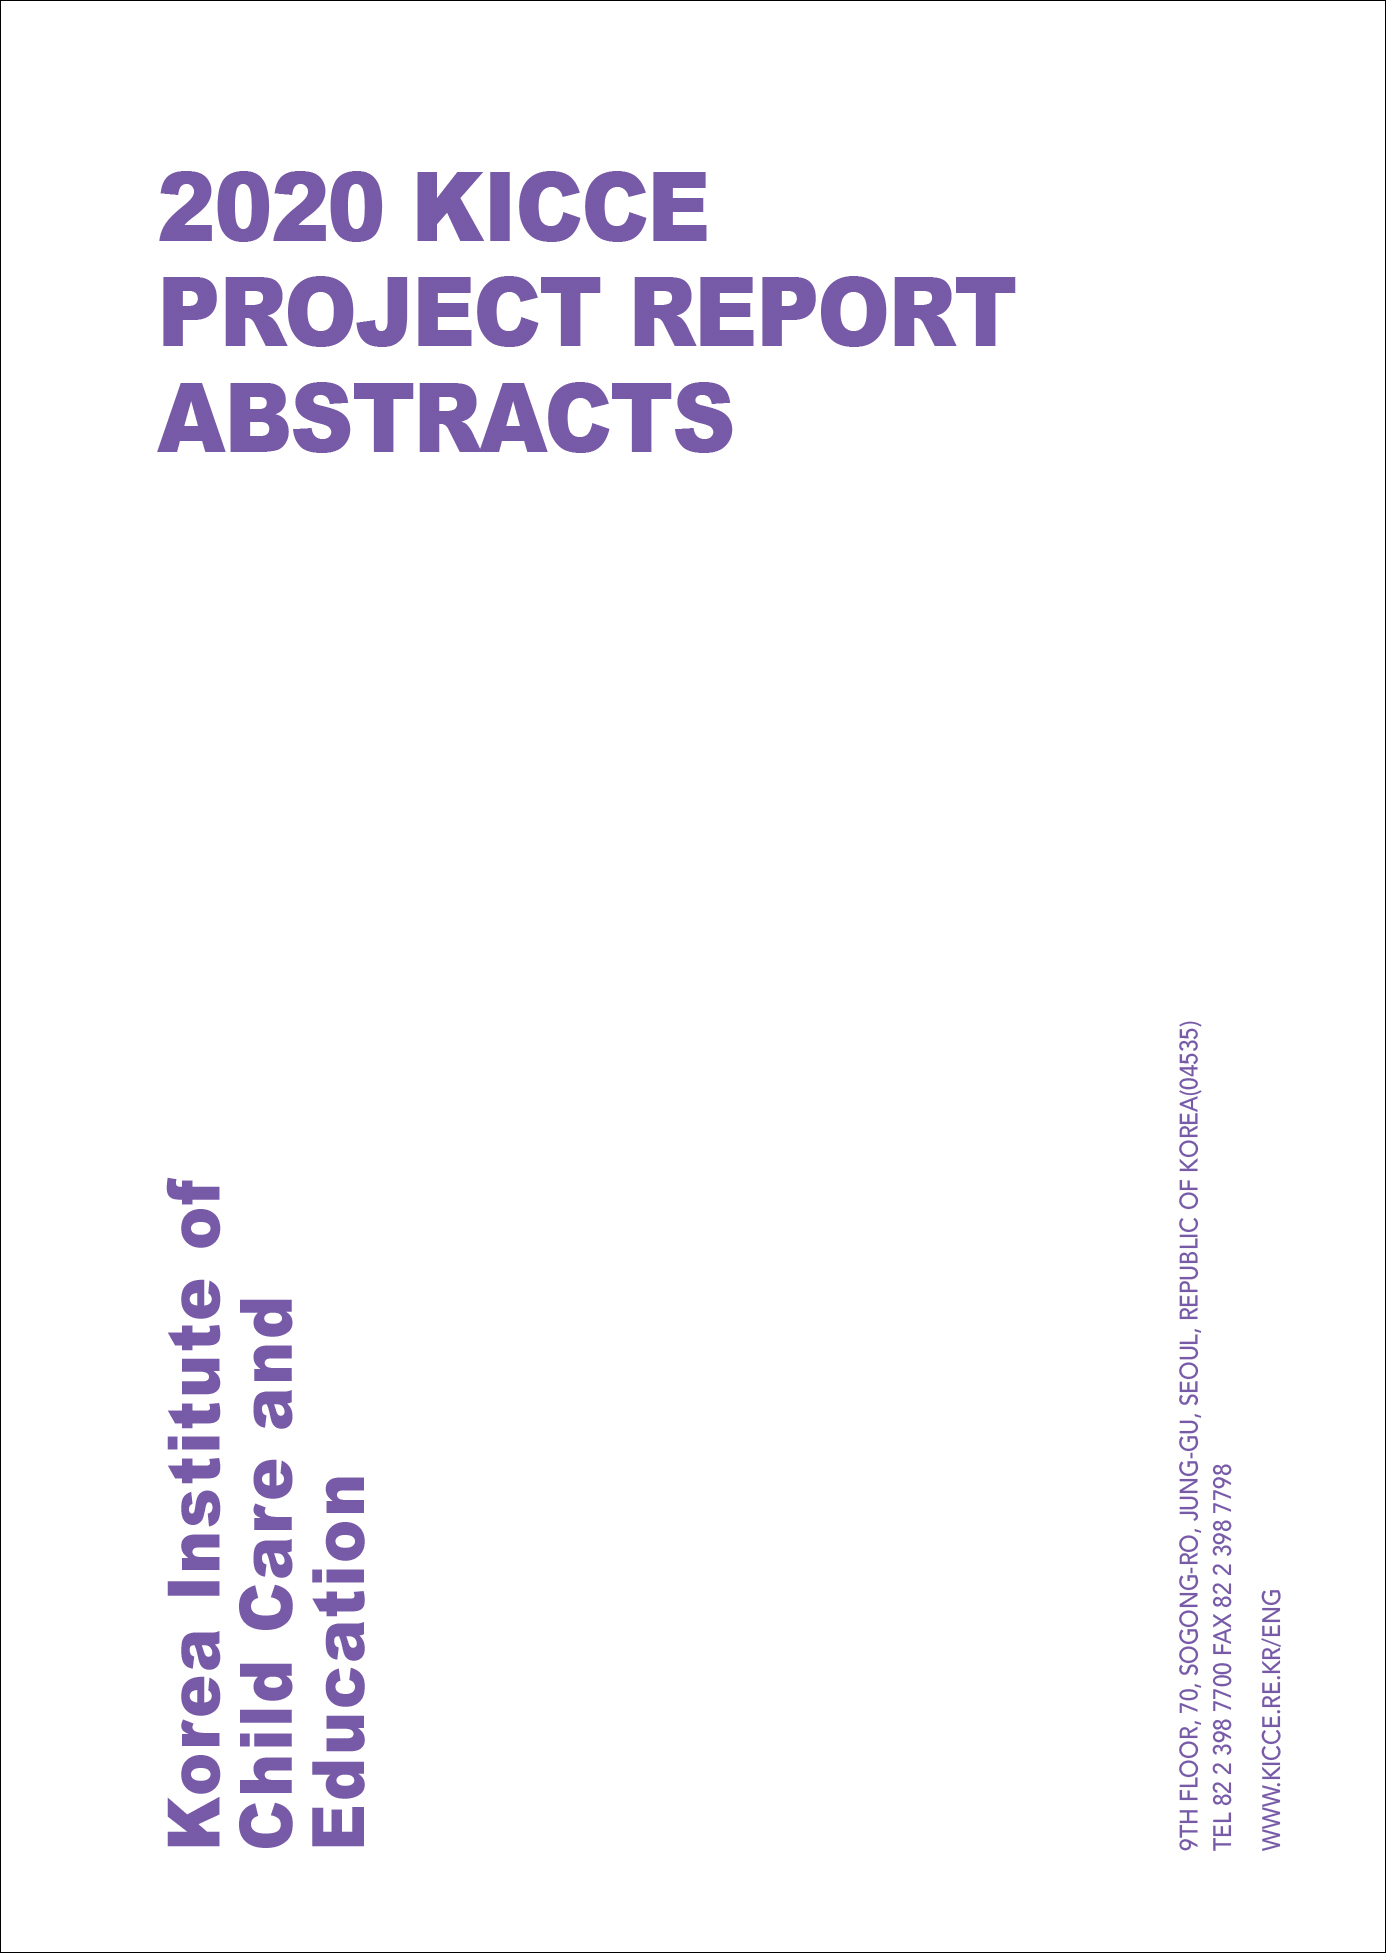 2020 KICCE Project Report Abstracts 표지 이미지 입니다.